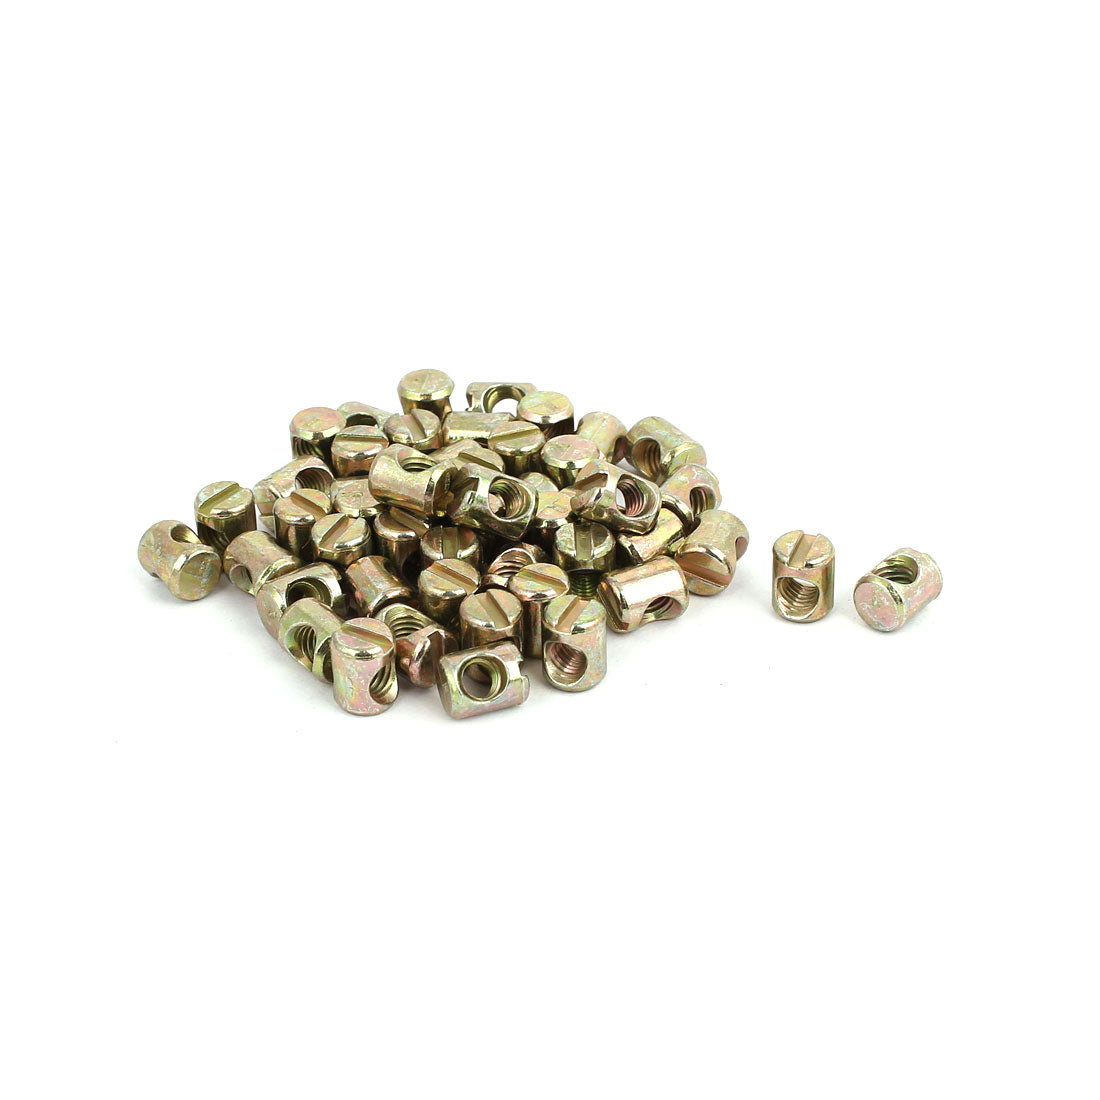 uxcell Uxcell M5x10mm Yellow Zinc Plated Cross Dowel Slotted Barrel Nuts 50pcs